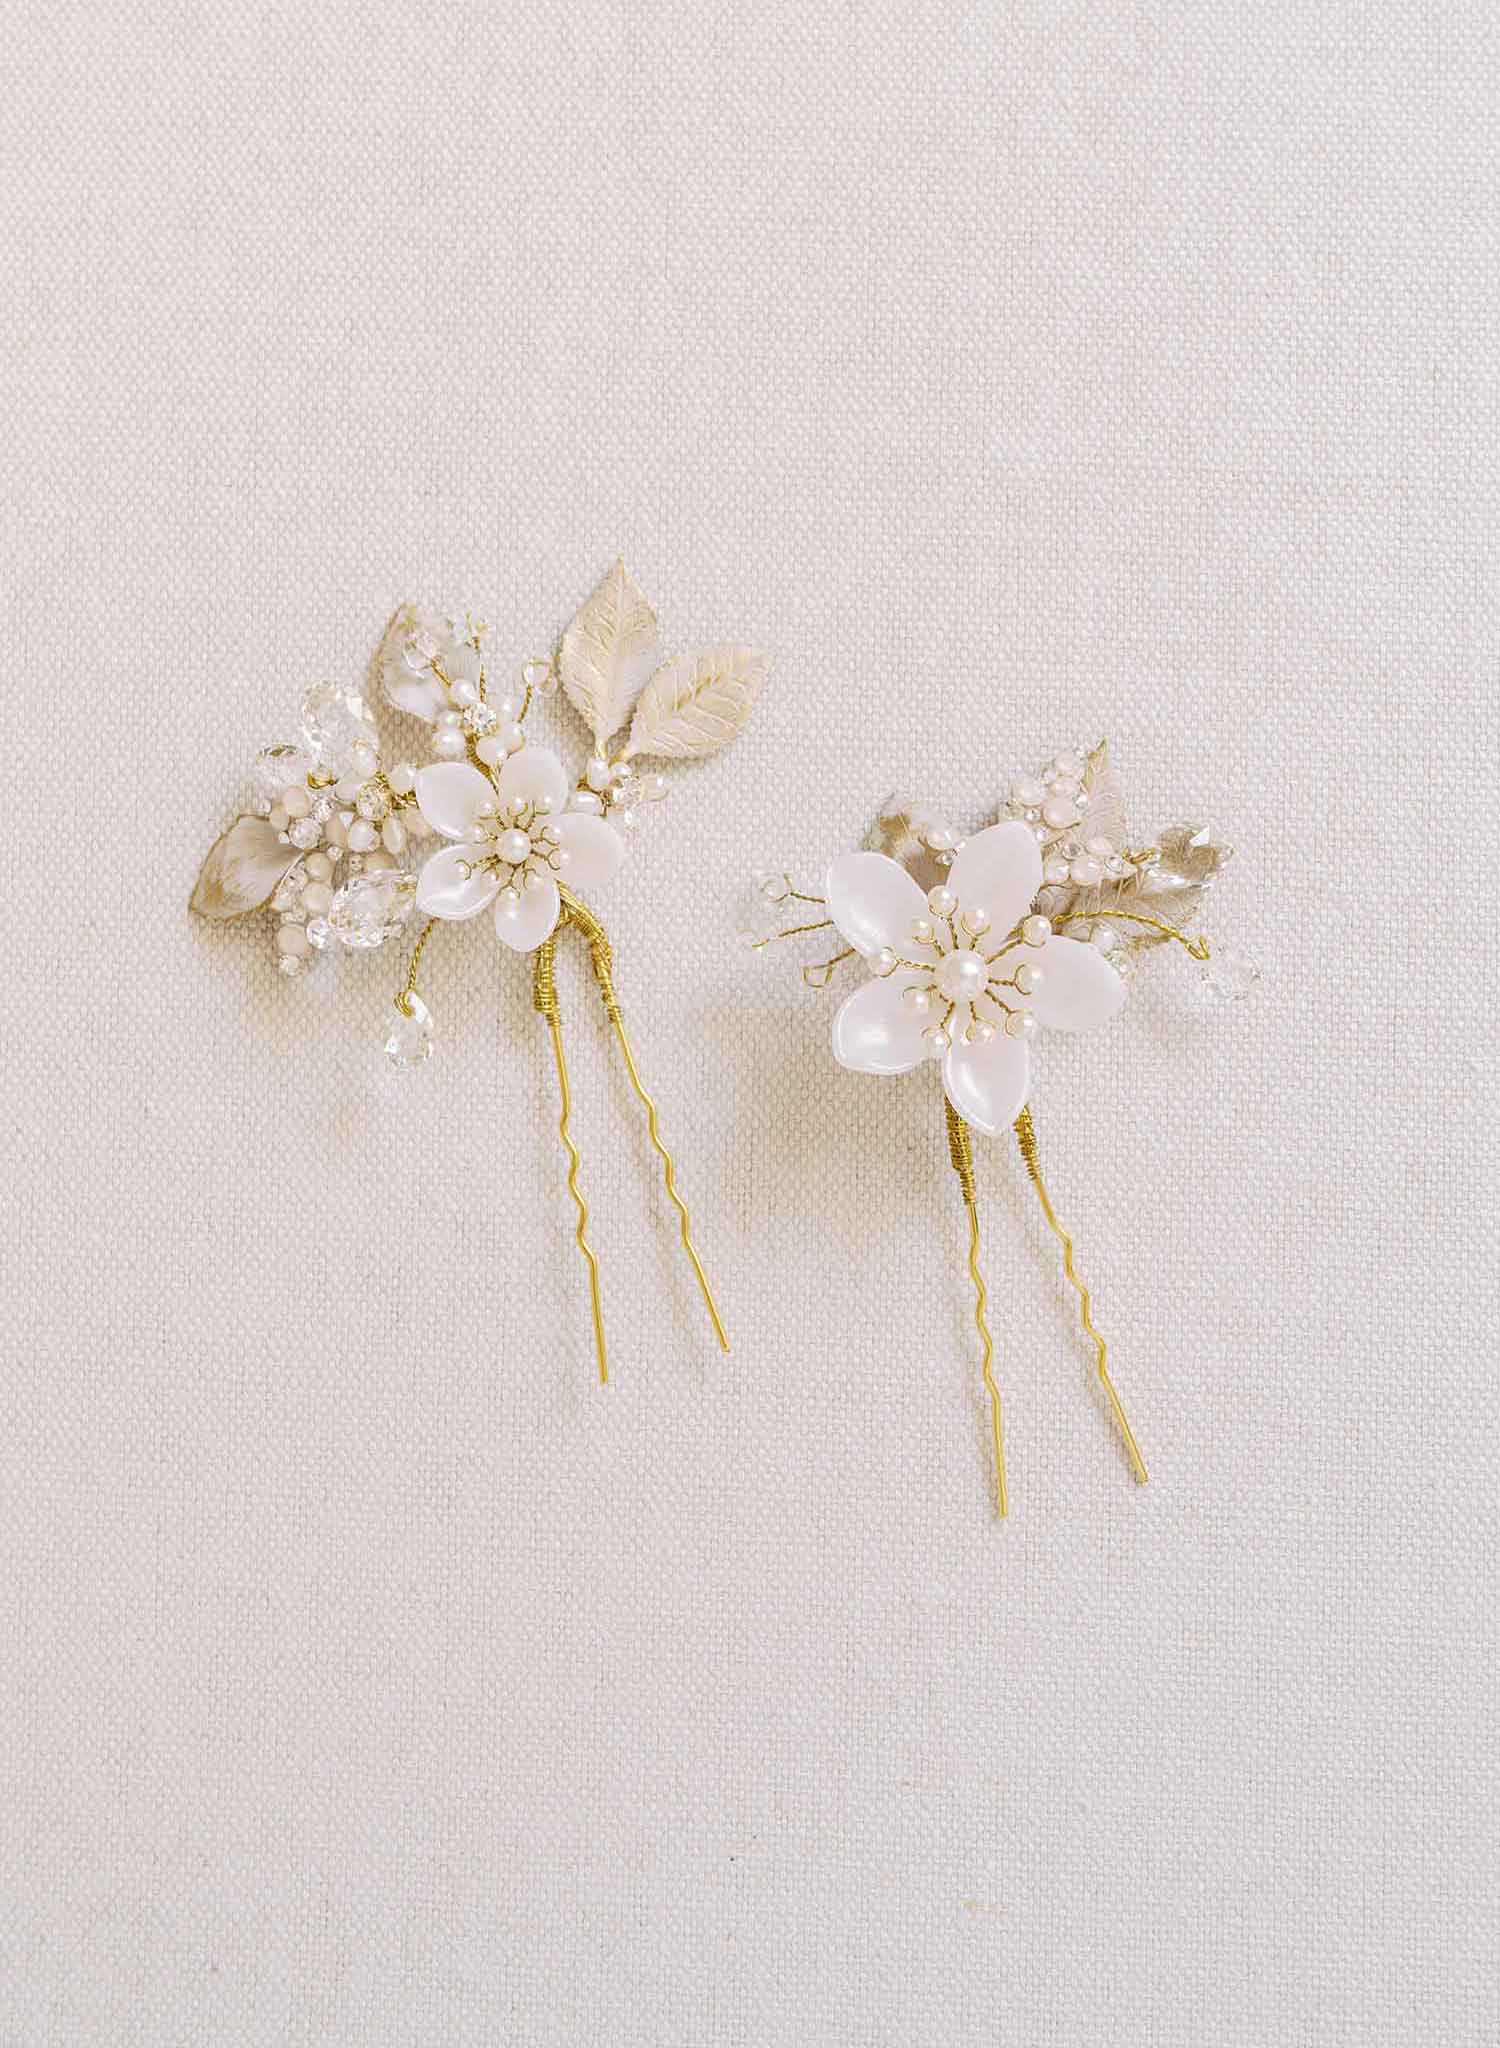 Pearlescent blossom bridal hair pin set of 2 - Style #2175